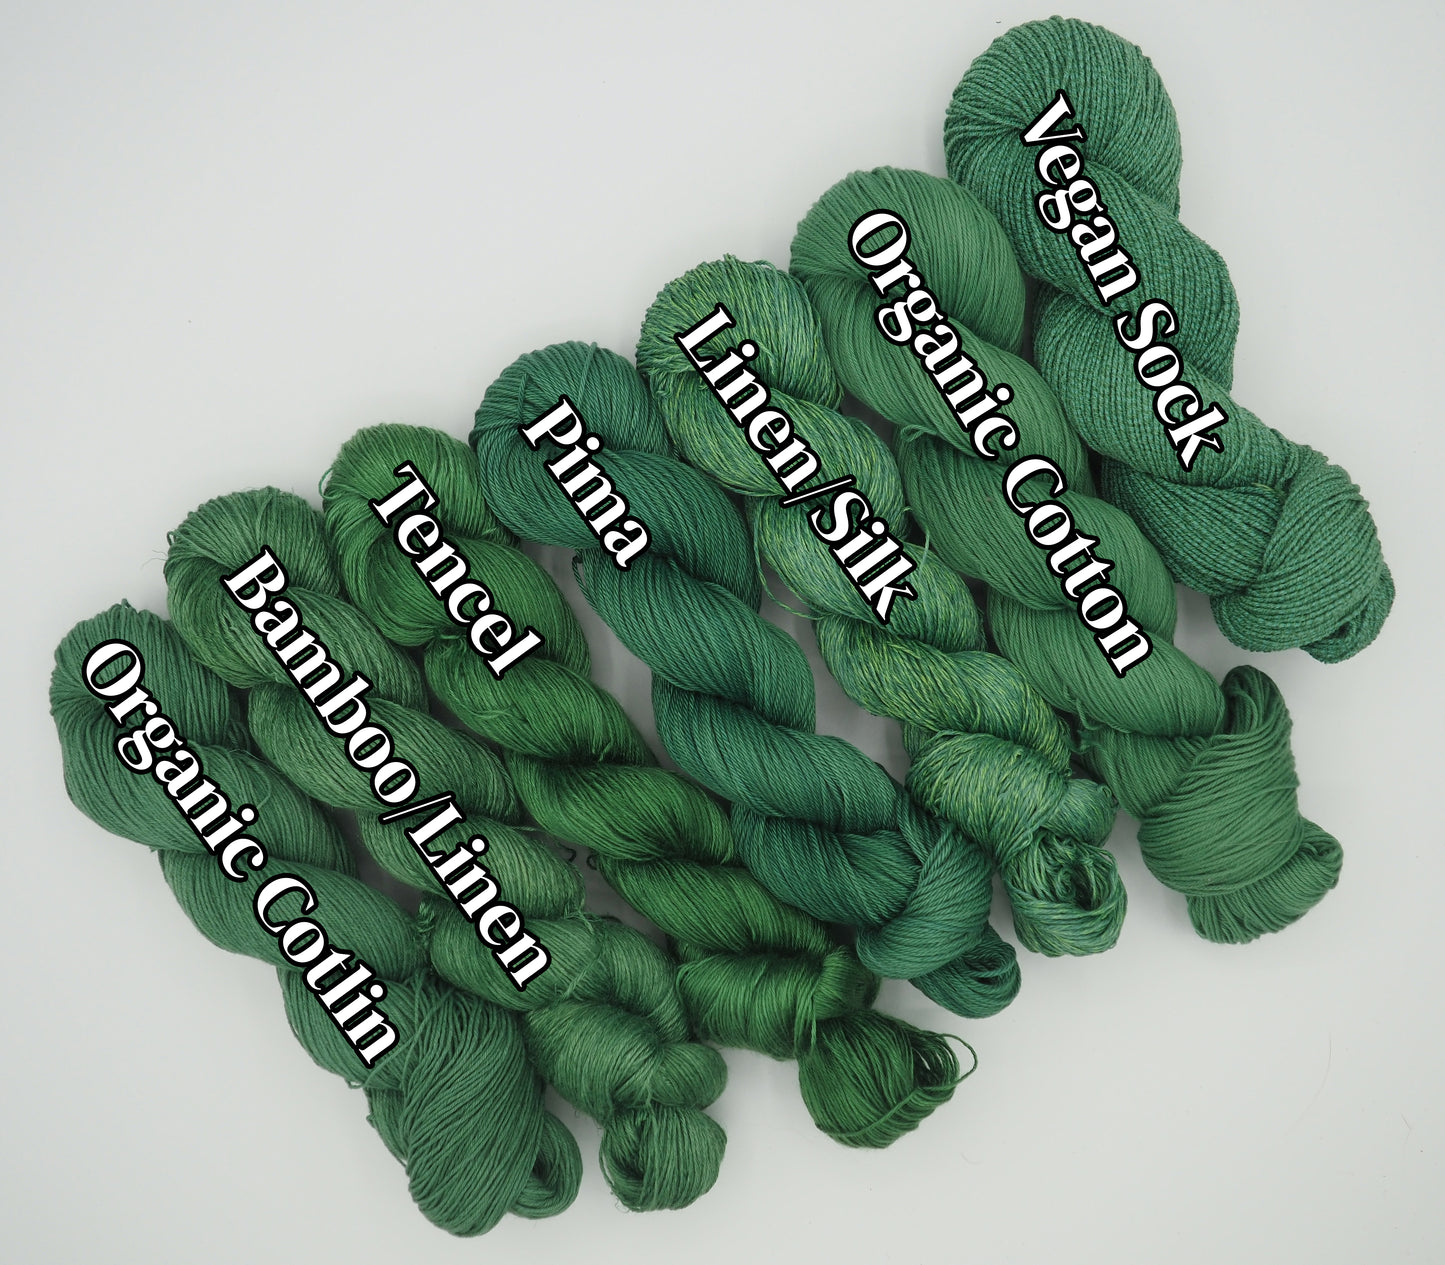 Spring Mini Skeins (25g) - dyed to order please allow 8 weeks for dyeing